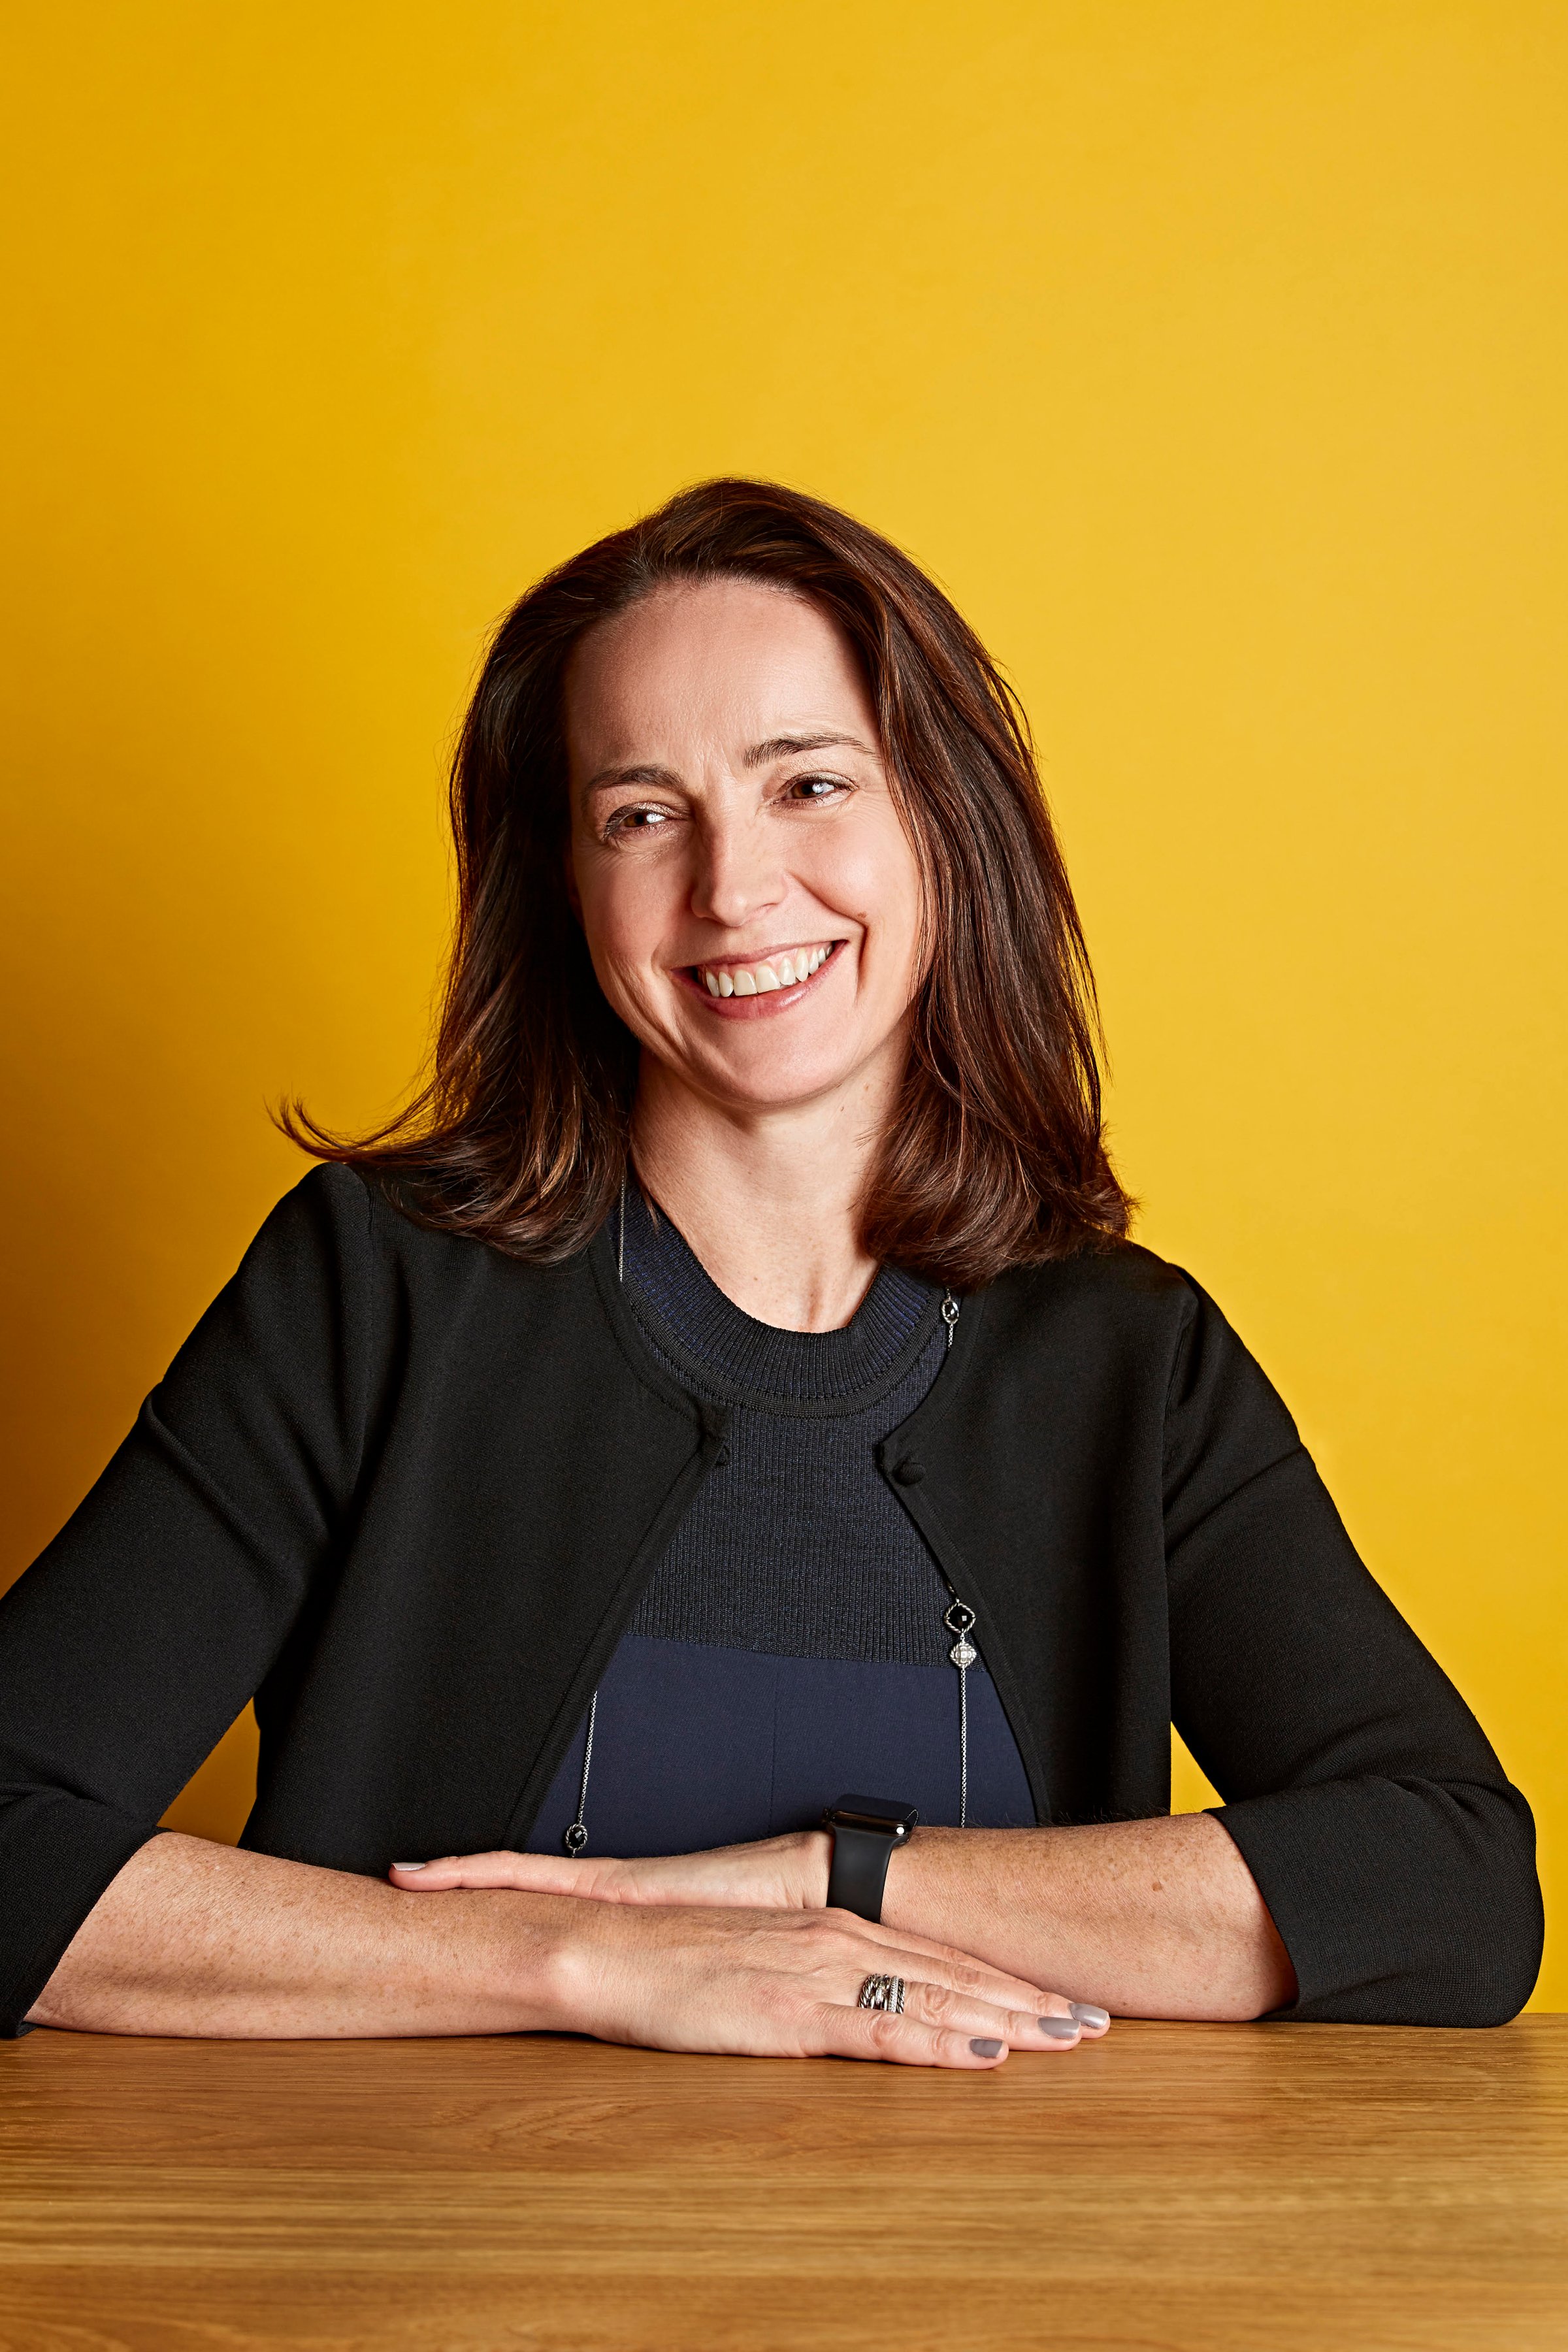 Sarah Friar, NextDoor CEO, photographed at their headquarters in San Francisco on May 10th, 2019.